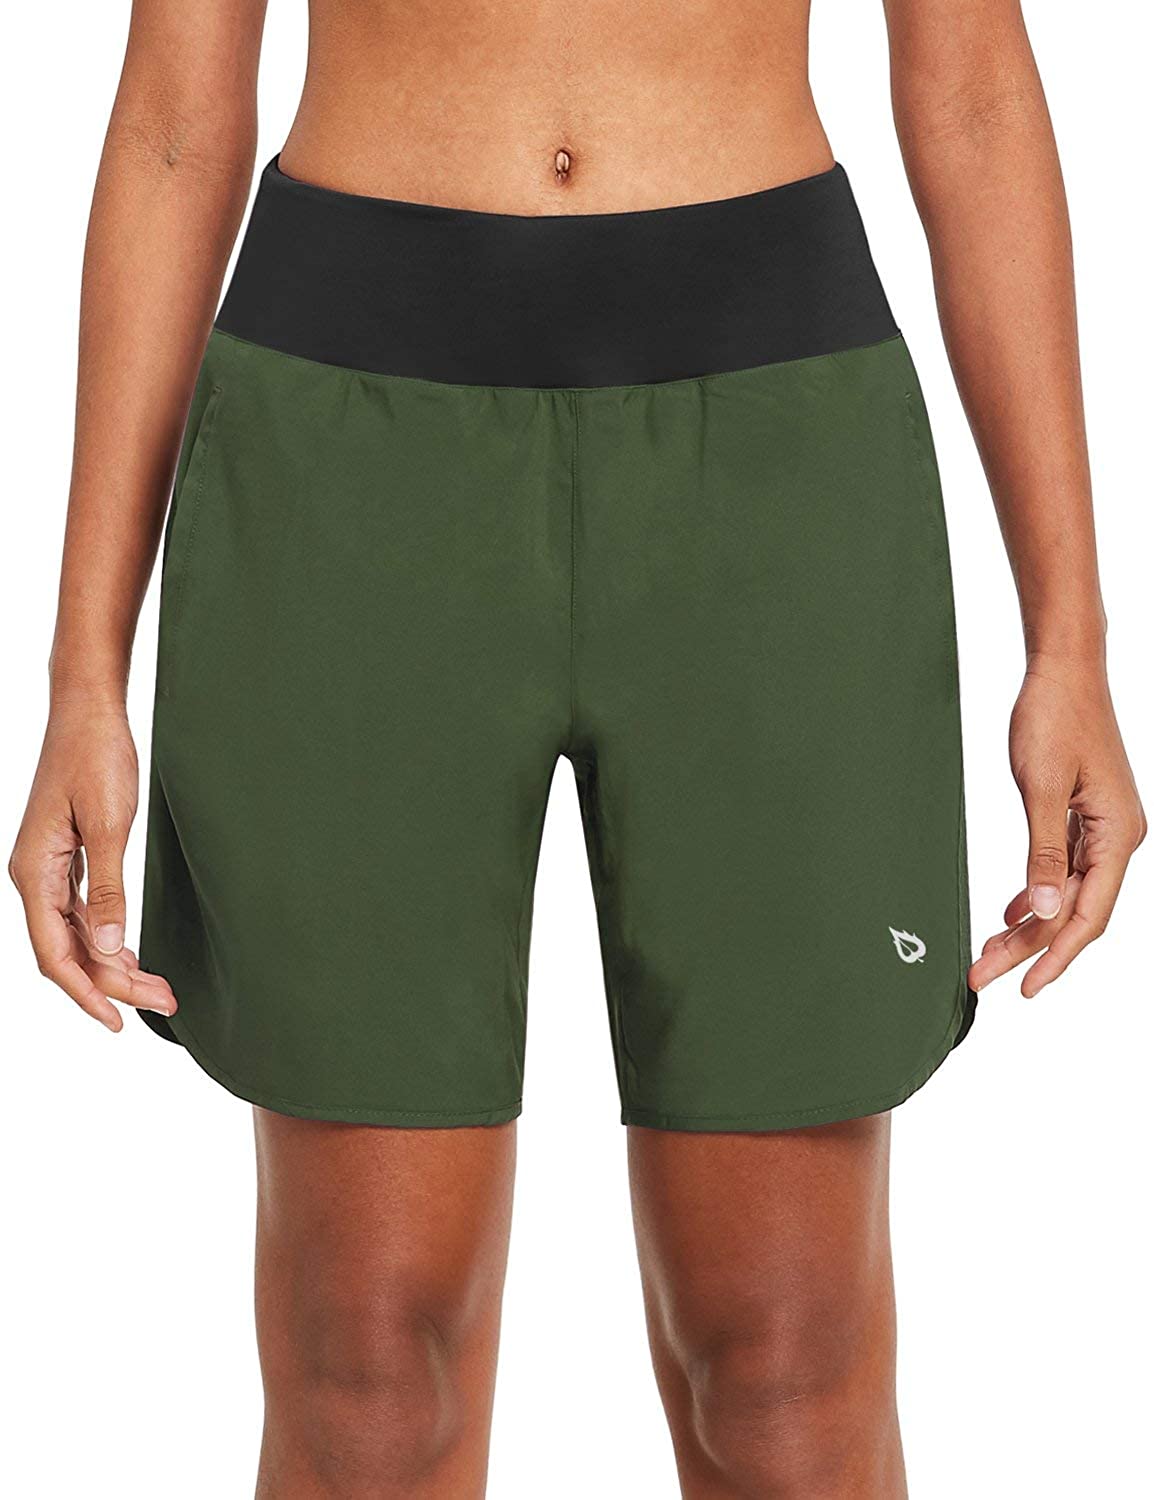 BALEAF Women's 7 Inches Long Running Shorts with Liner Lounge